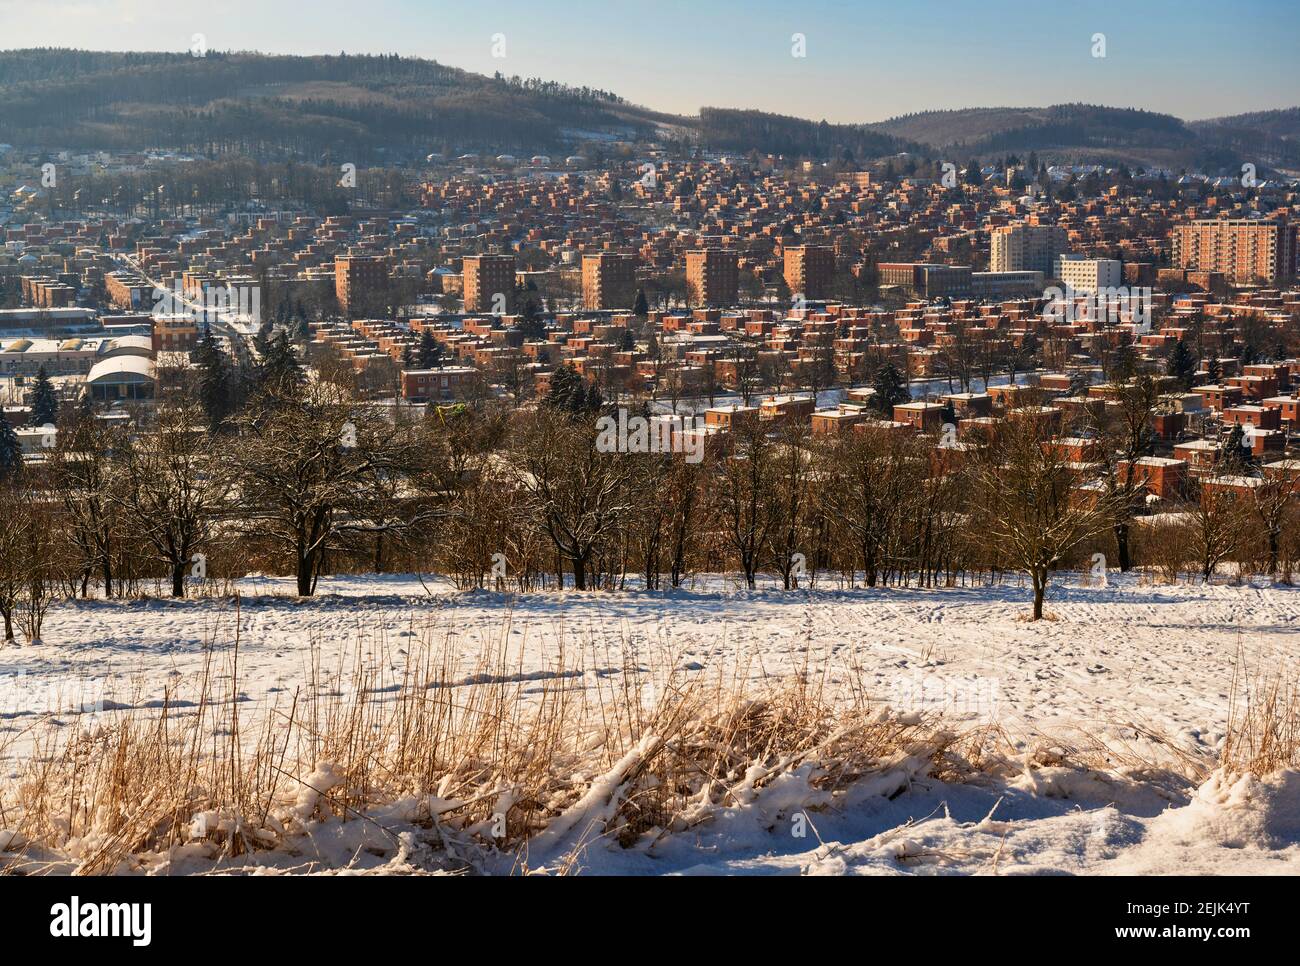 Red brick houses, typical for unique architecture in city Zlin, winter view of residential area with hills. Czech republic. Stock Photo